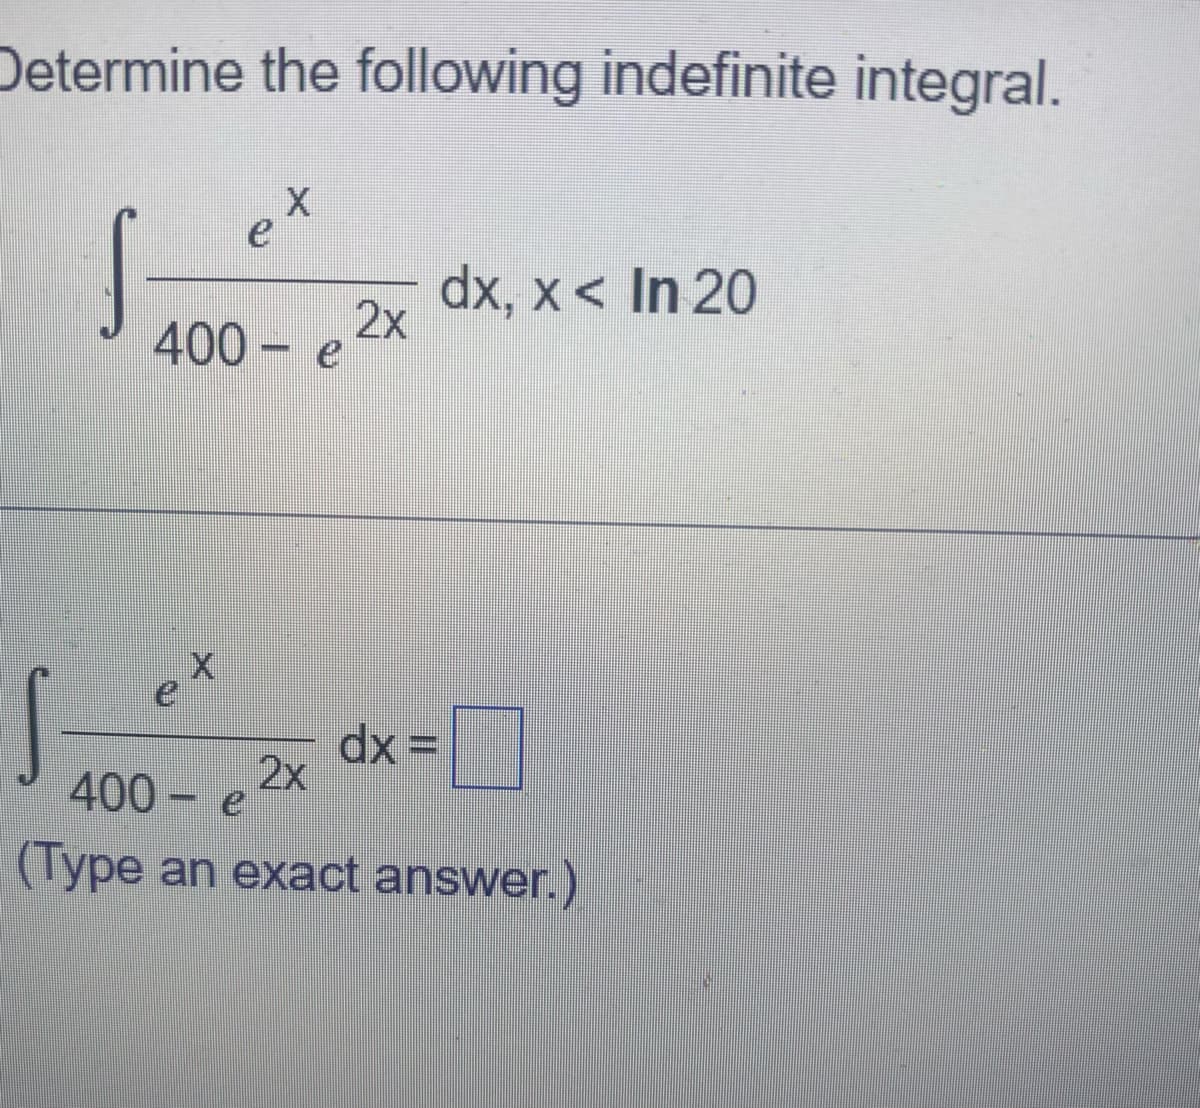 Determine the following indefinite integral.
X
400 - e
2x
dx, x < In 20
dx=
2x
400-e
(Type an exact answer.)